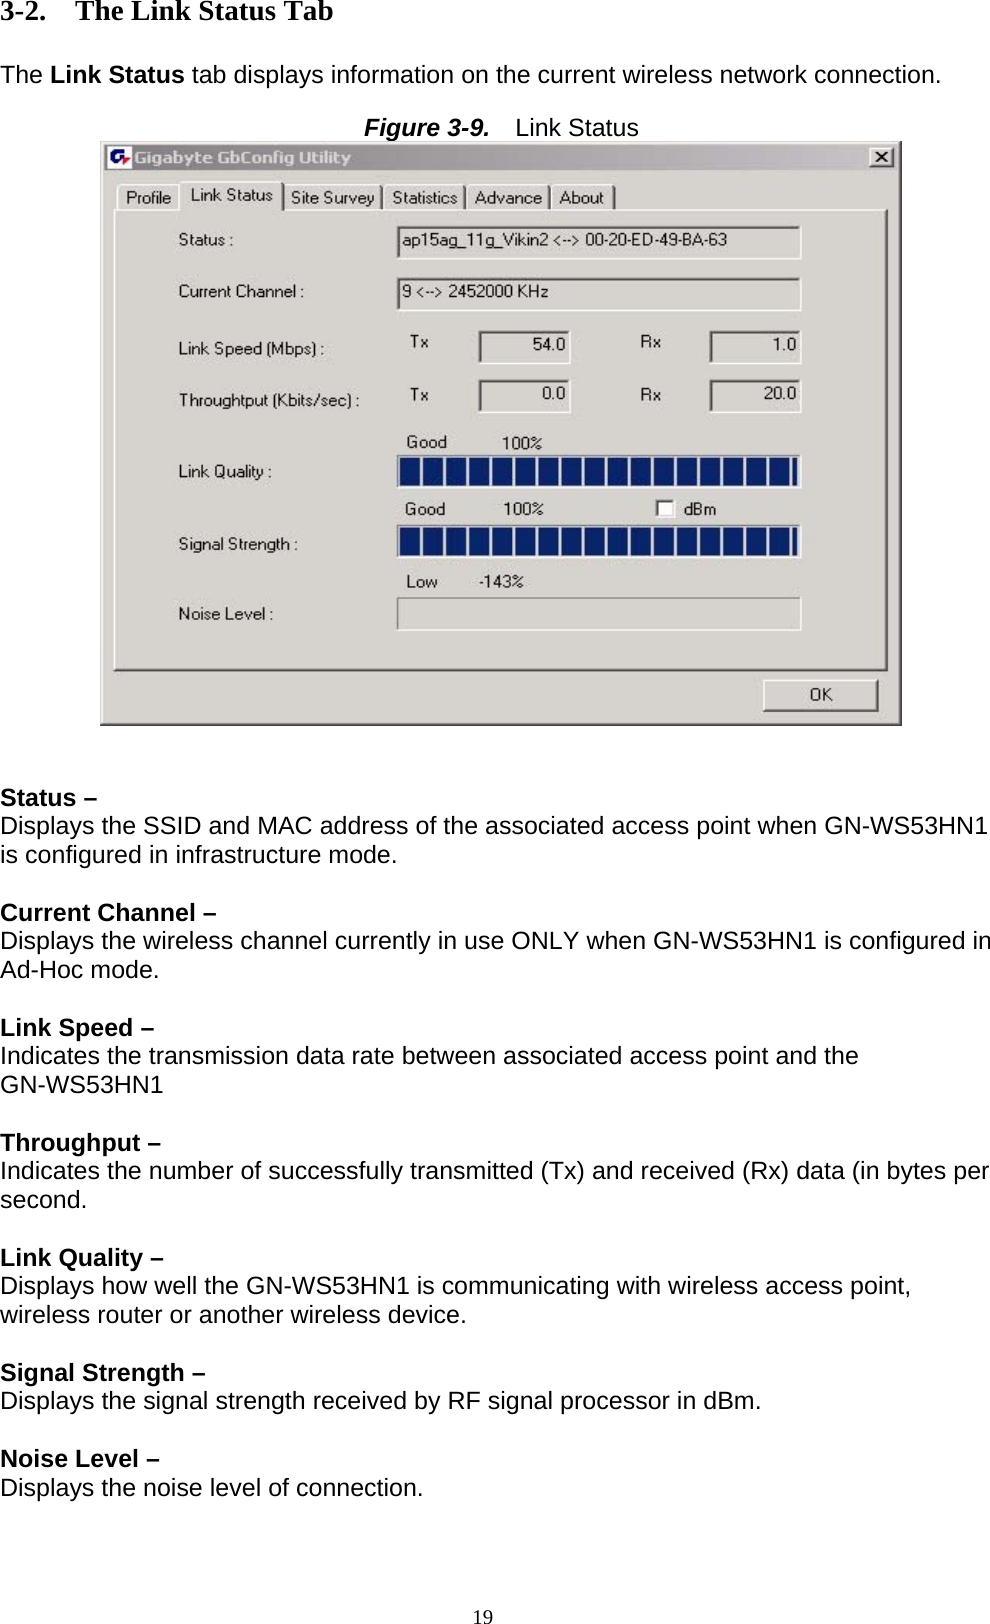 19  3-2. The Link Status Tab  The Link Status tab displays information on the current wireless network connection.  Figure 3-9.   Link Status    Status –   Displays the SSID and MAC address of the associated access point when GN-WS53HN1 is configured in infrastructure mode.  Current Channel – Displays the wireless channel currently in use ONLY when GN-WS53HN1 is configured in Ad-Hoc mode.  Link Speed –   Indicates the transmission data rate between associated access point and the GN-WS53HN1  Throughput –   Indicates the number of successfully transmitted (Tx) and received (Rx) data (in bytes per second.  Link Quality – Displays how well the GN-WS53HN1 is communicating with wireless access point, wireless router or another wireless device.  Signal Strength –   Displays the signal strength received by RF signal processor in dBm.  Noise Level – Displays the noise level of connection.   